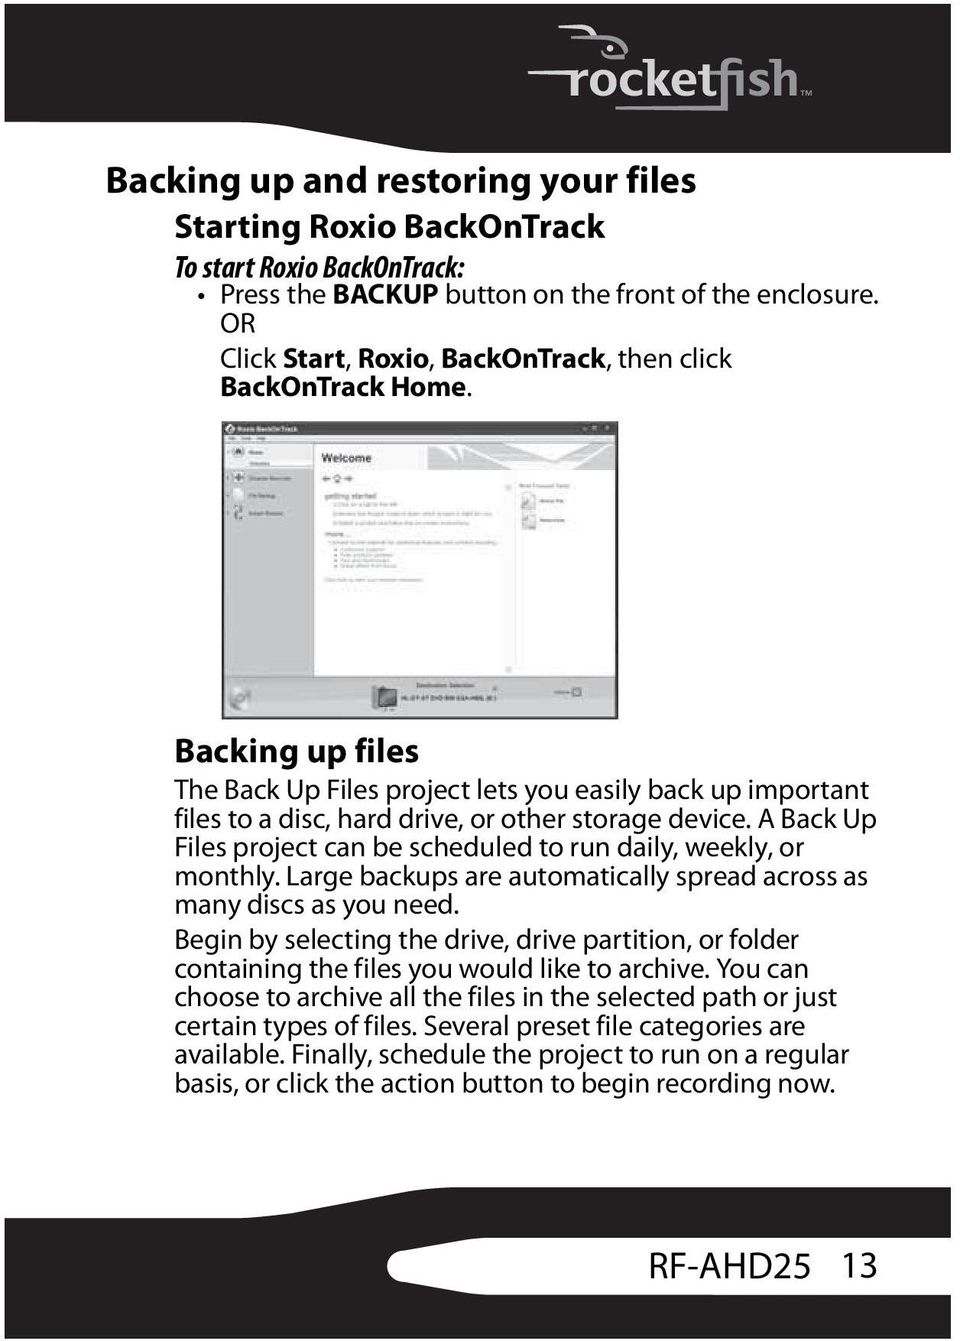 A Back Up Files project can be scheduled to run daily, weekly, or monthly. Large backups are automatically spread across as many discs as you need.